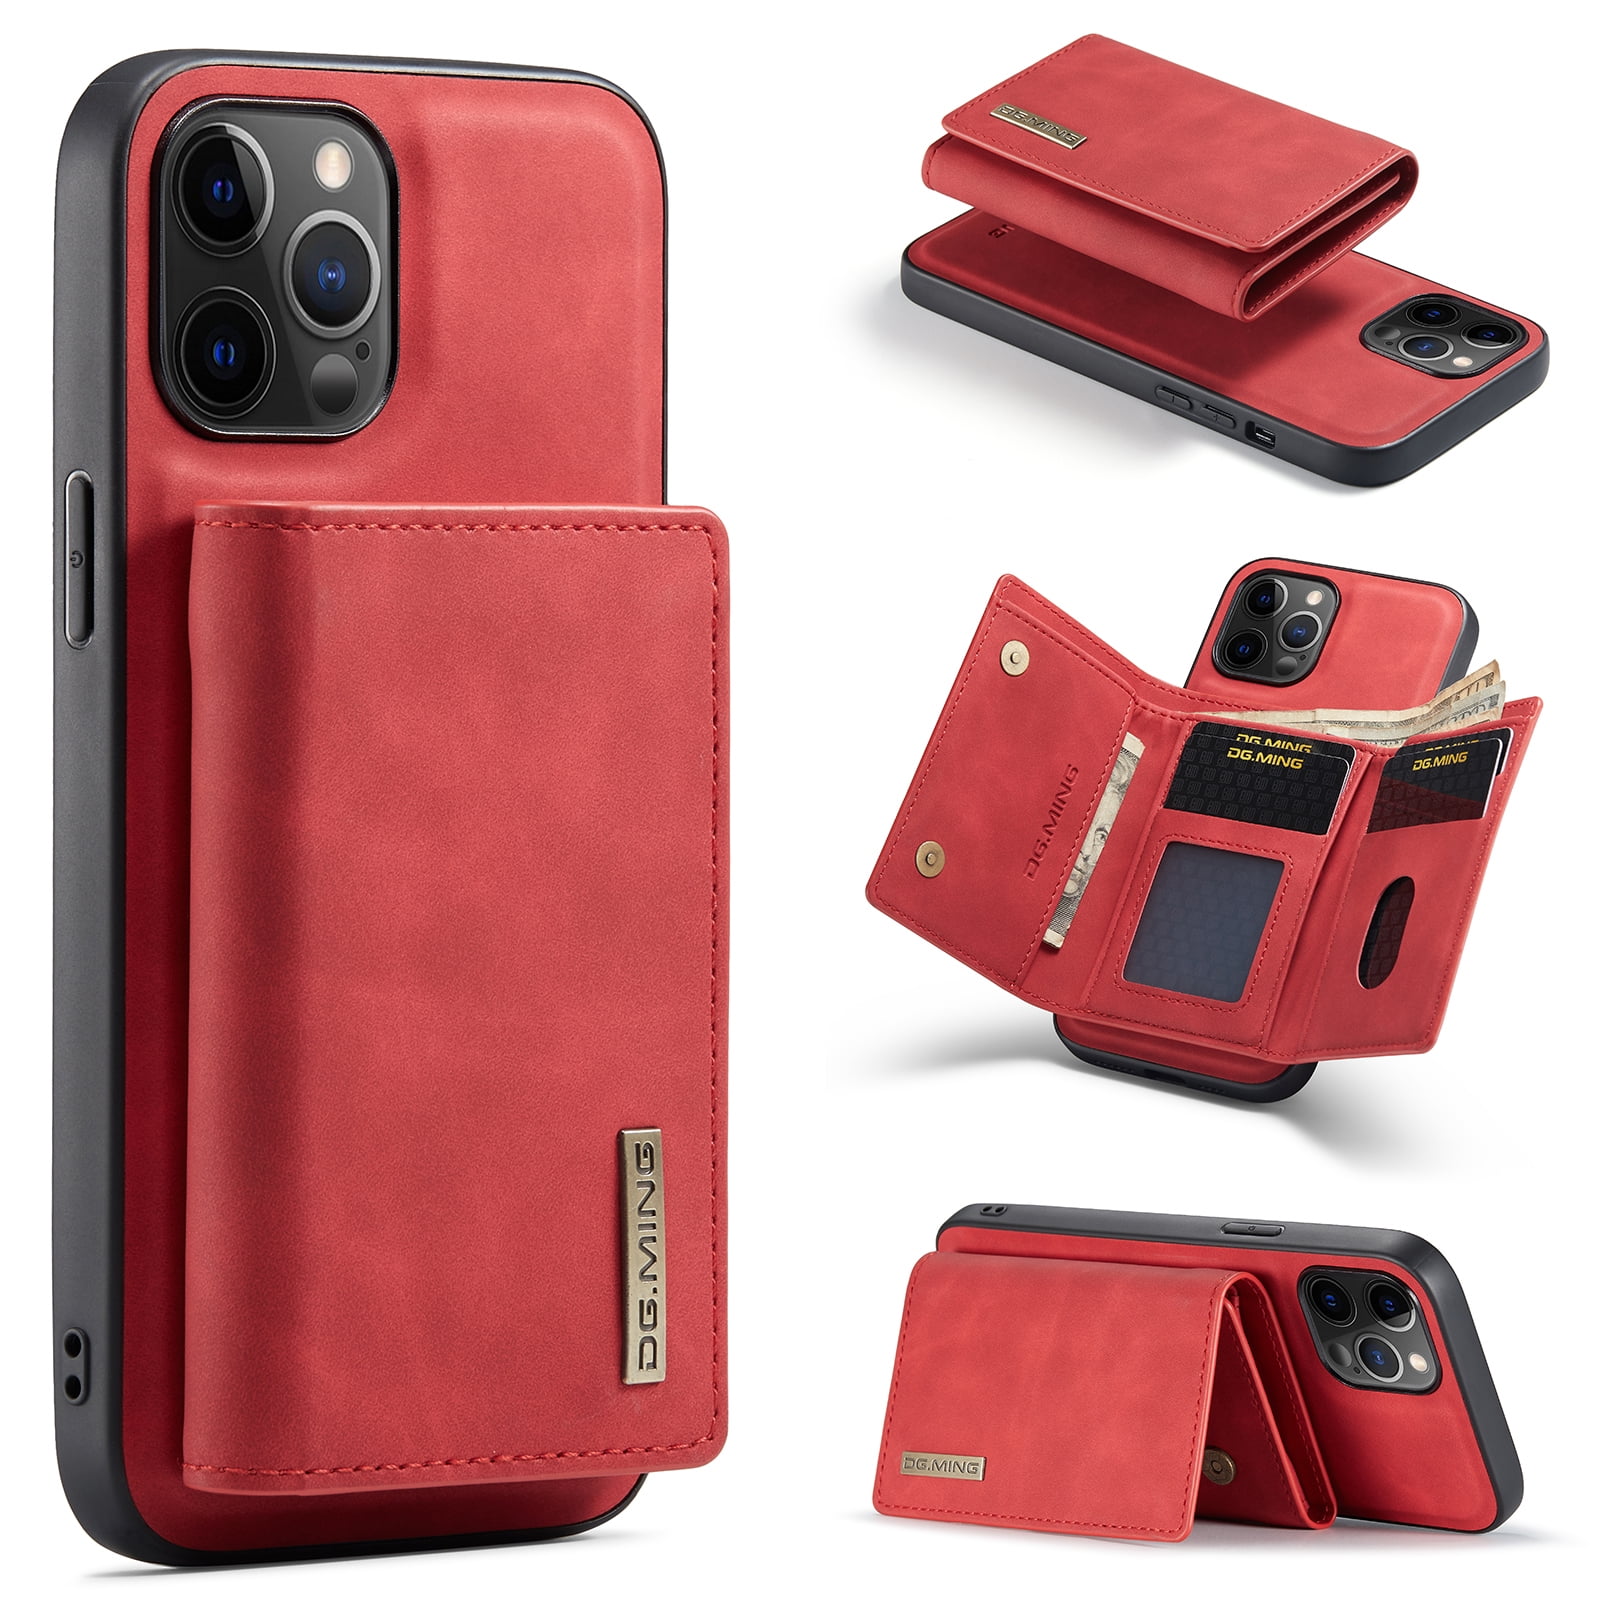  Porter Riley - Leather Case for iPhone XR. Premium